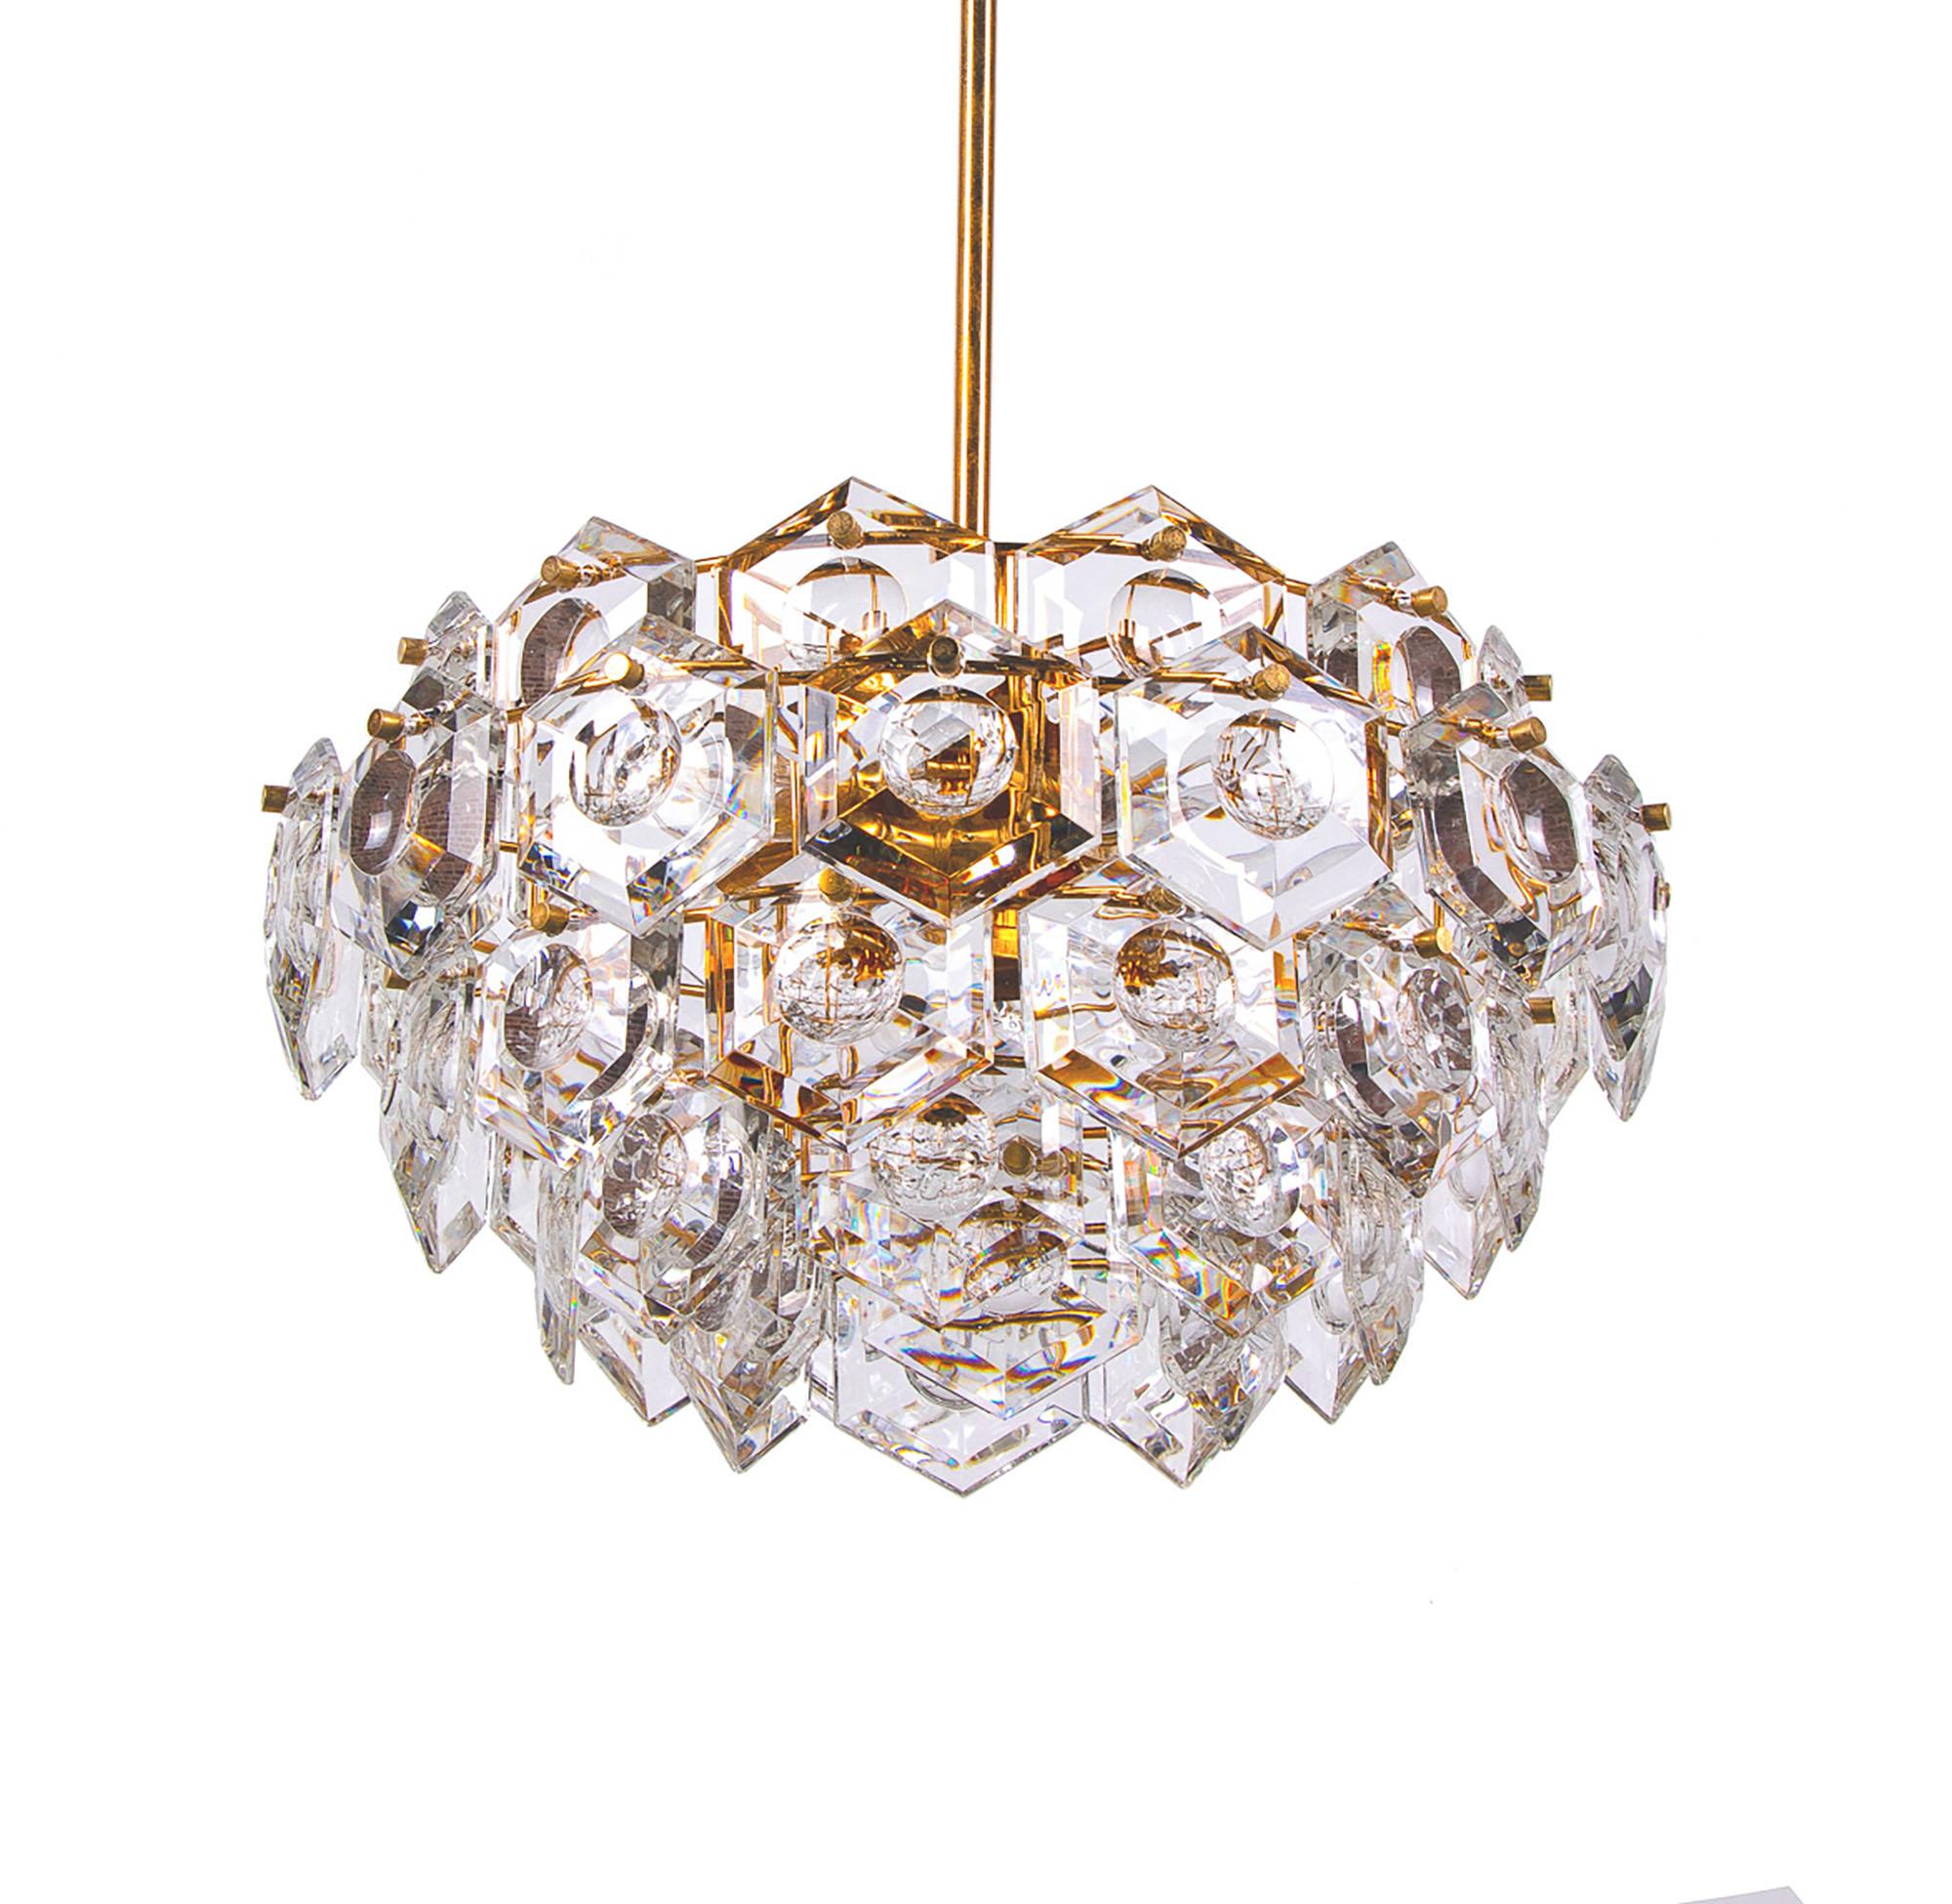 Elegant chandelier with sculptural faceted crystals on a gold-plated brass frame. Chandelier illuminates beautifully and offers a lot of light. Gem from the time. With this light you make a clear statement in your interior design. A real eye-catcher